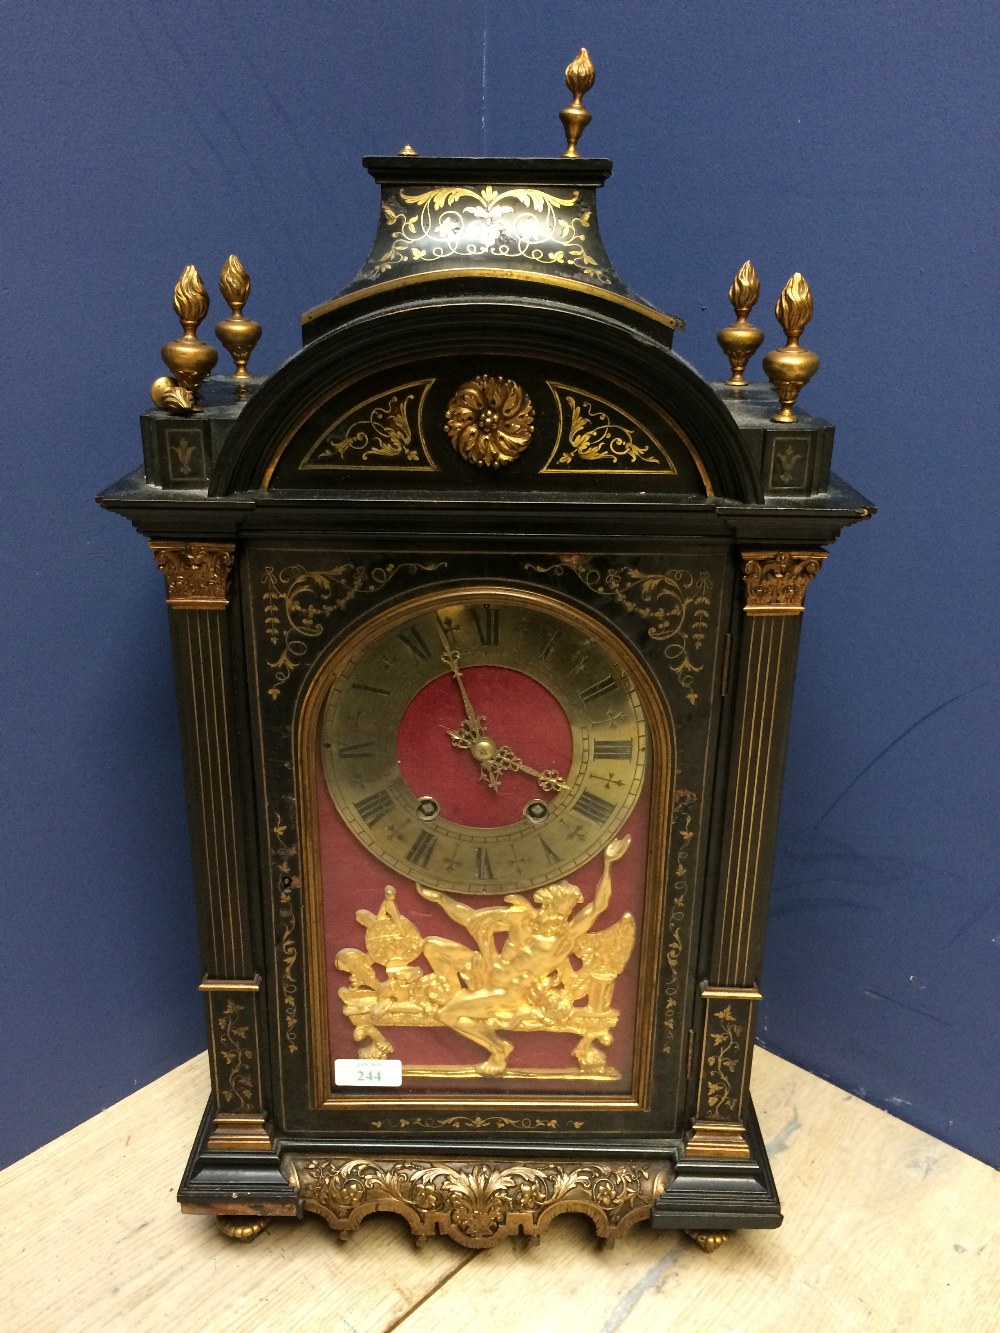 C19th ebony and boullework bracket clock, the hinged front door revealing a brass open circular dial